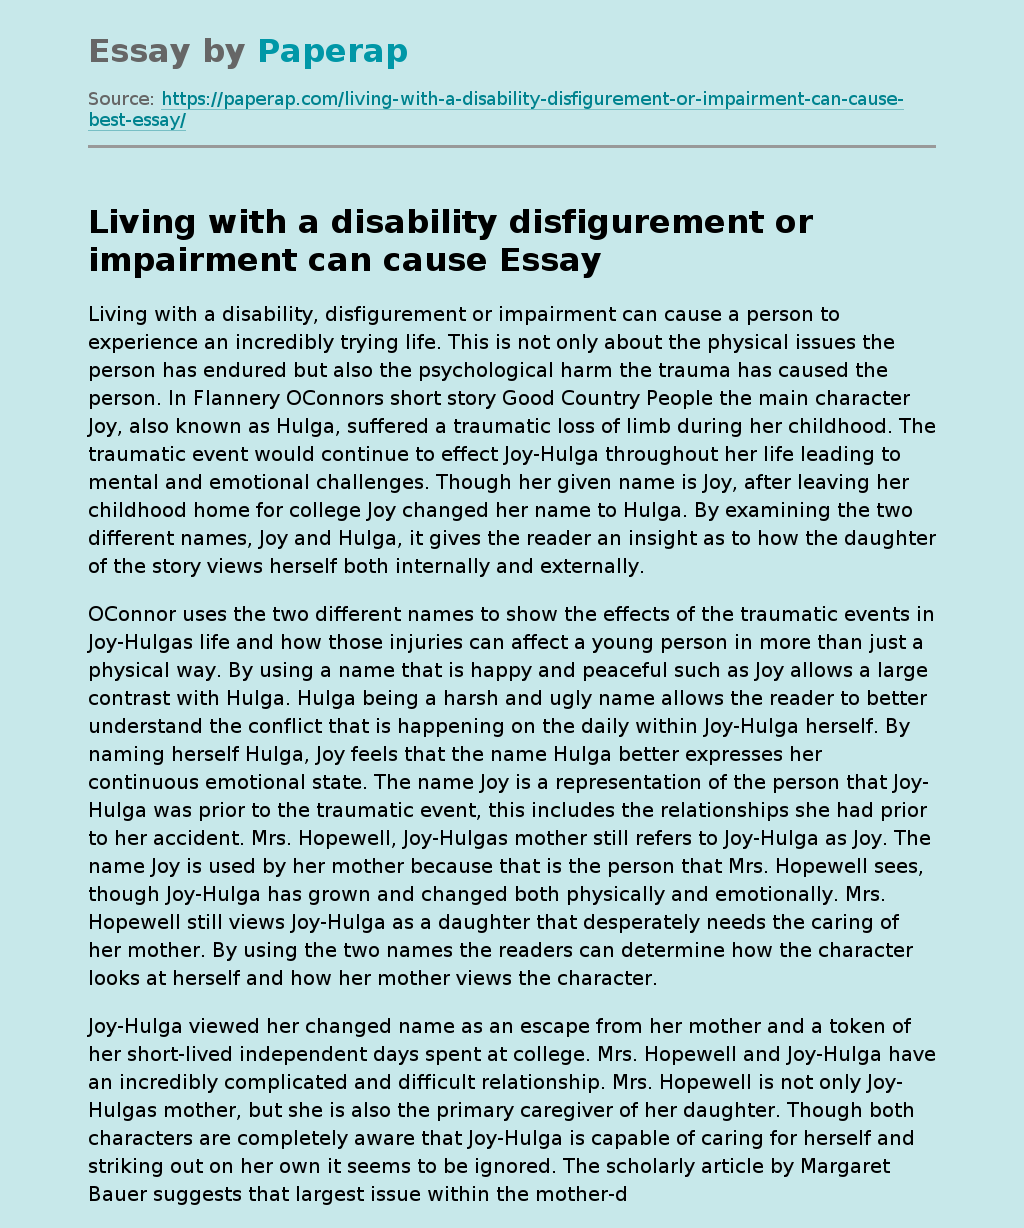 Living With a Disability Disfigurement or Impairment